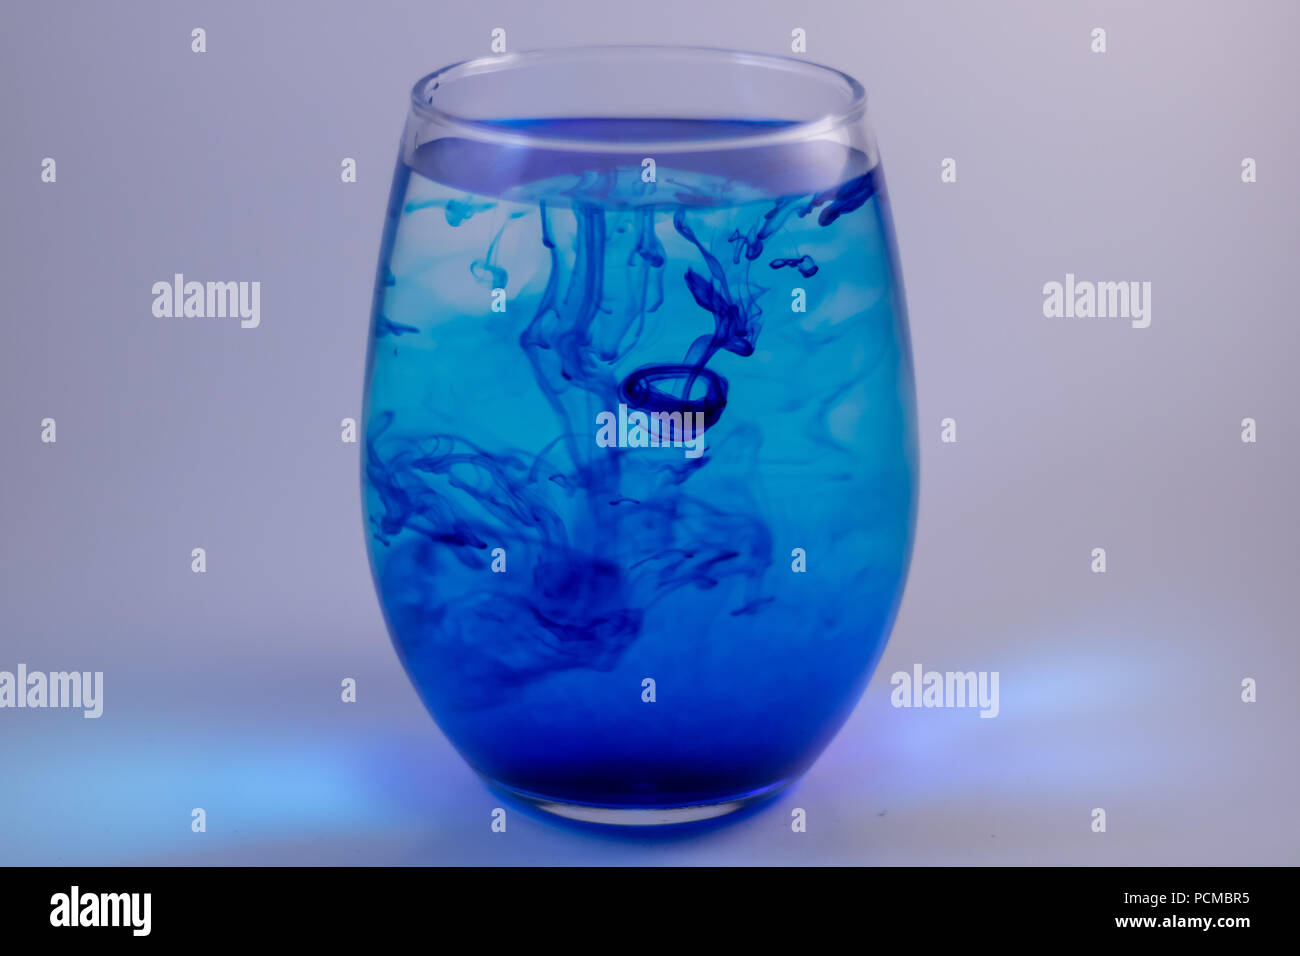 Blue food coloring added to water to create fascinating patterns. Stock Photo